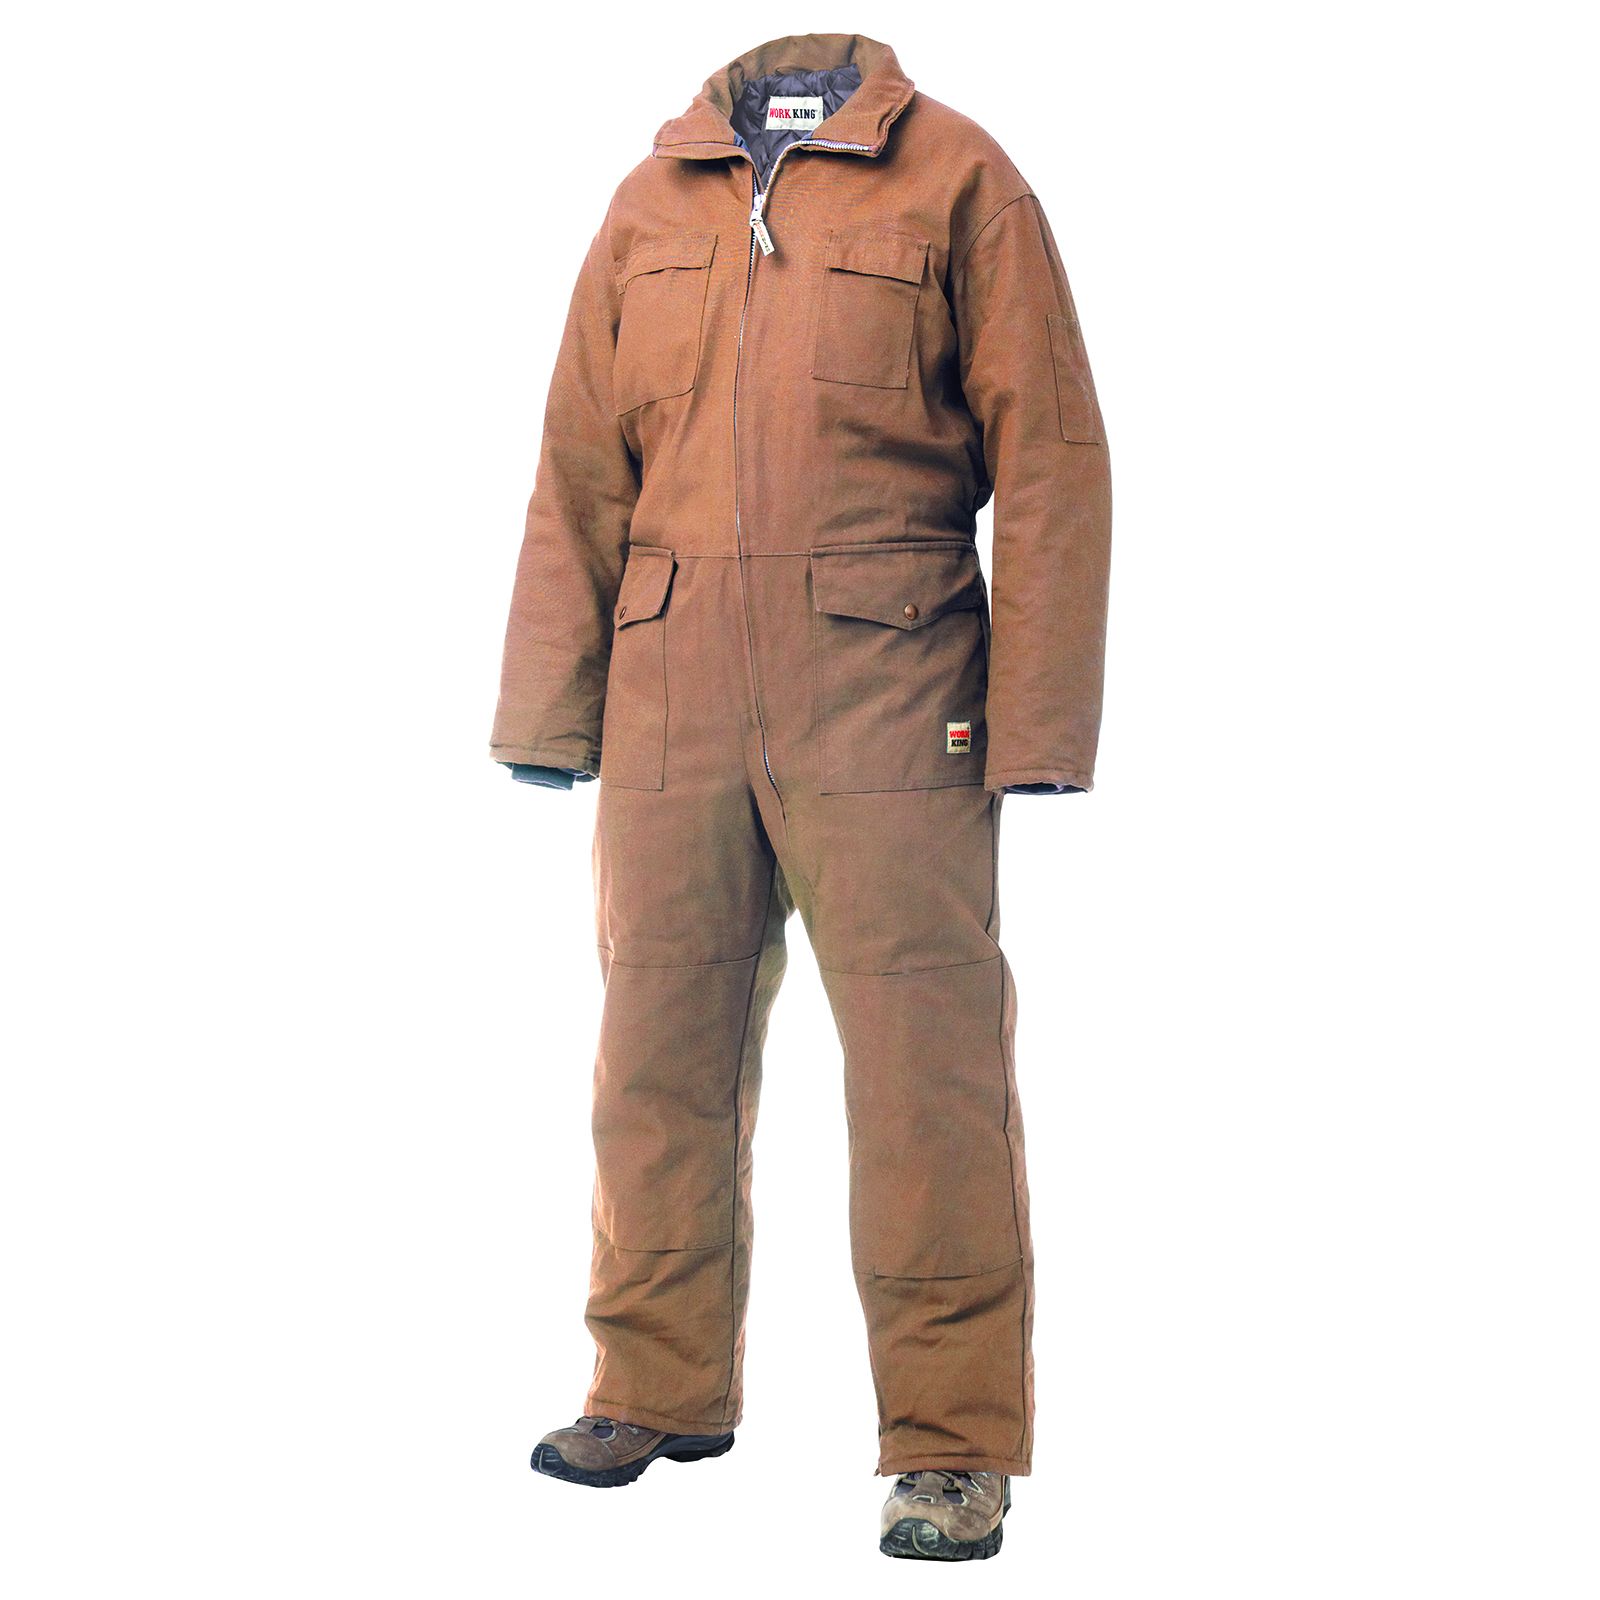 Work King deluxe lined coverall